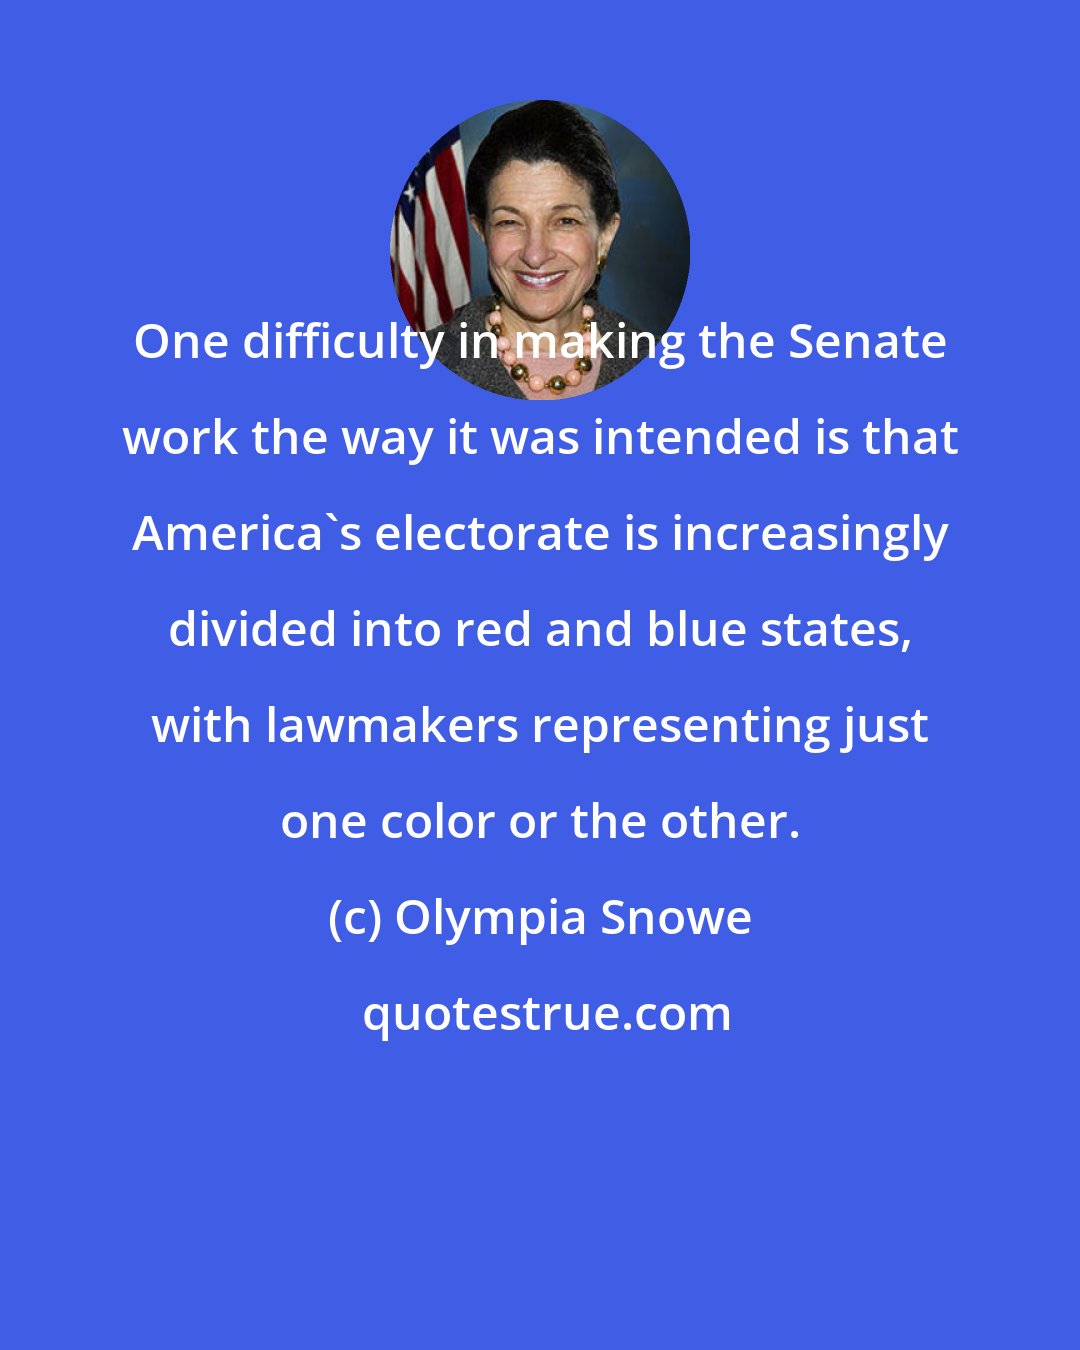 Olympia Snowe: One difficulty in making the Senate work the way it was intended is that America's electorate is increasingly divided into red and blue states, with lawmakers representing just one color or the other.